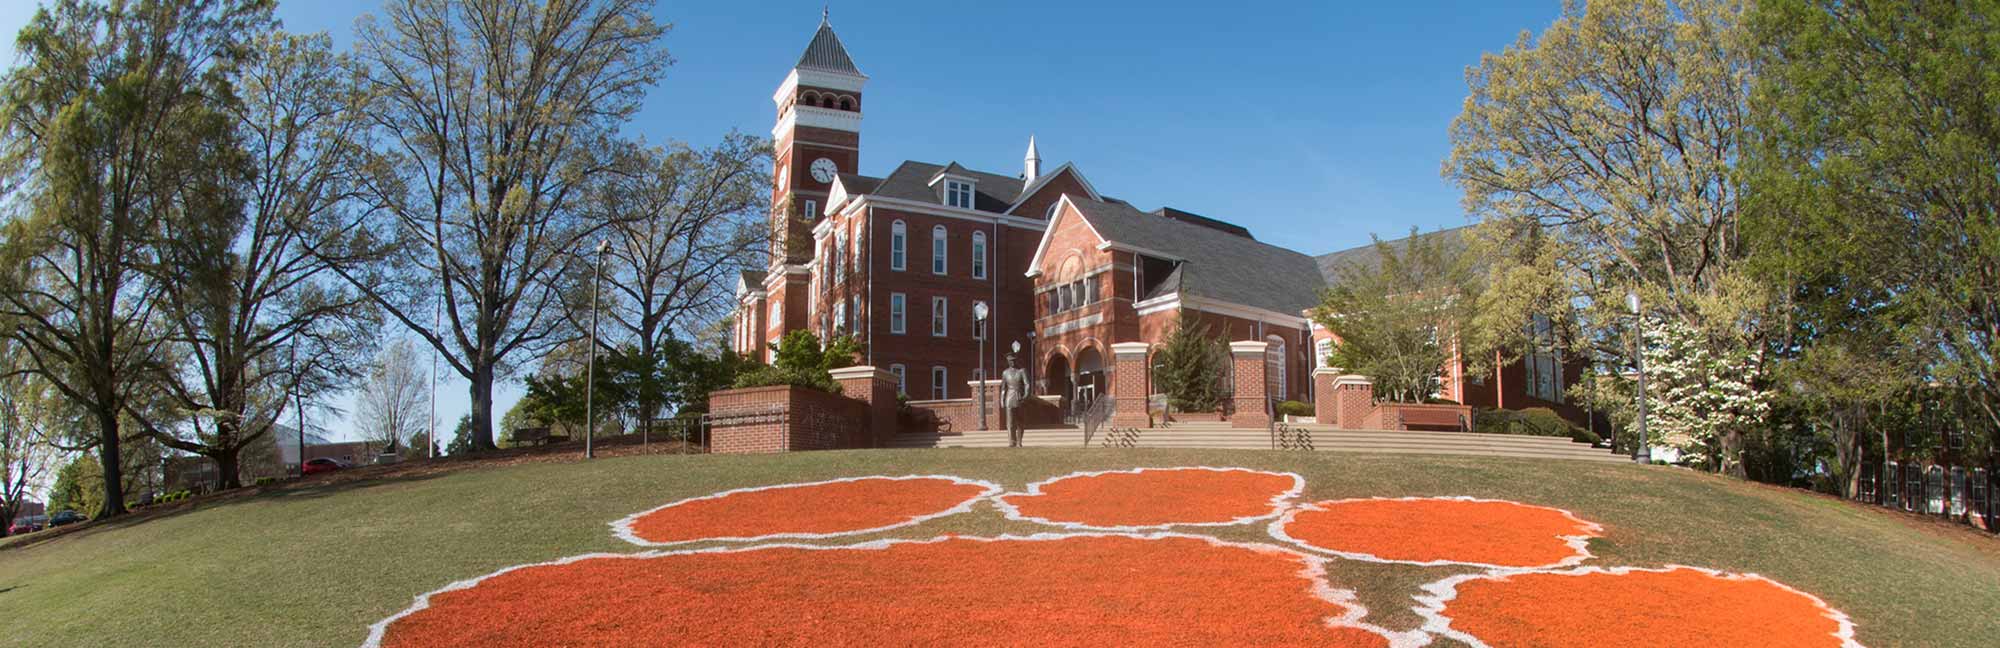 Clemson University Admissions Necessary Requirements to Apply